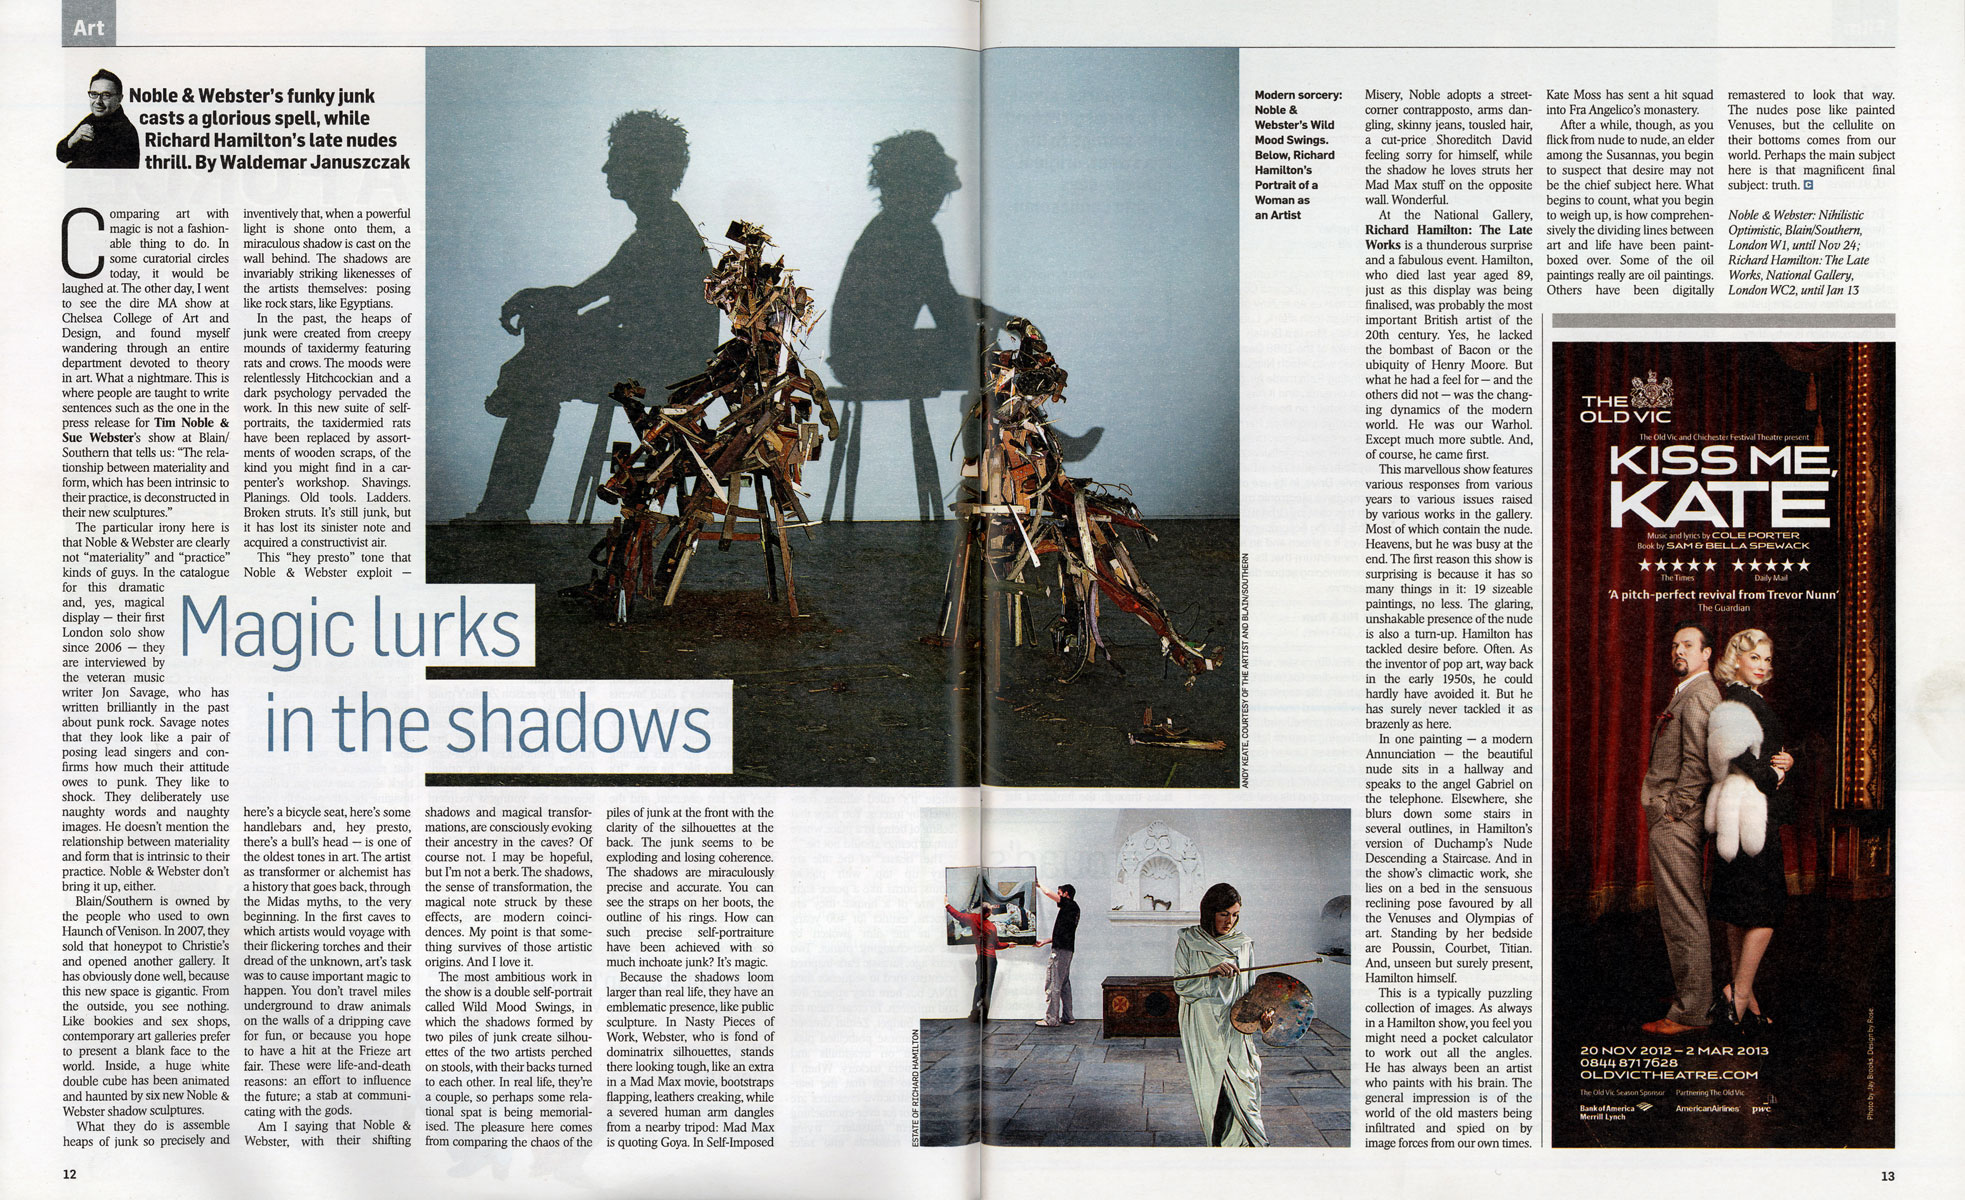 The Sunday Times Culture Magazine, 14-10-12 pgs 12-13